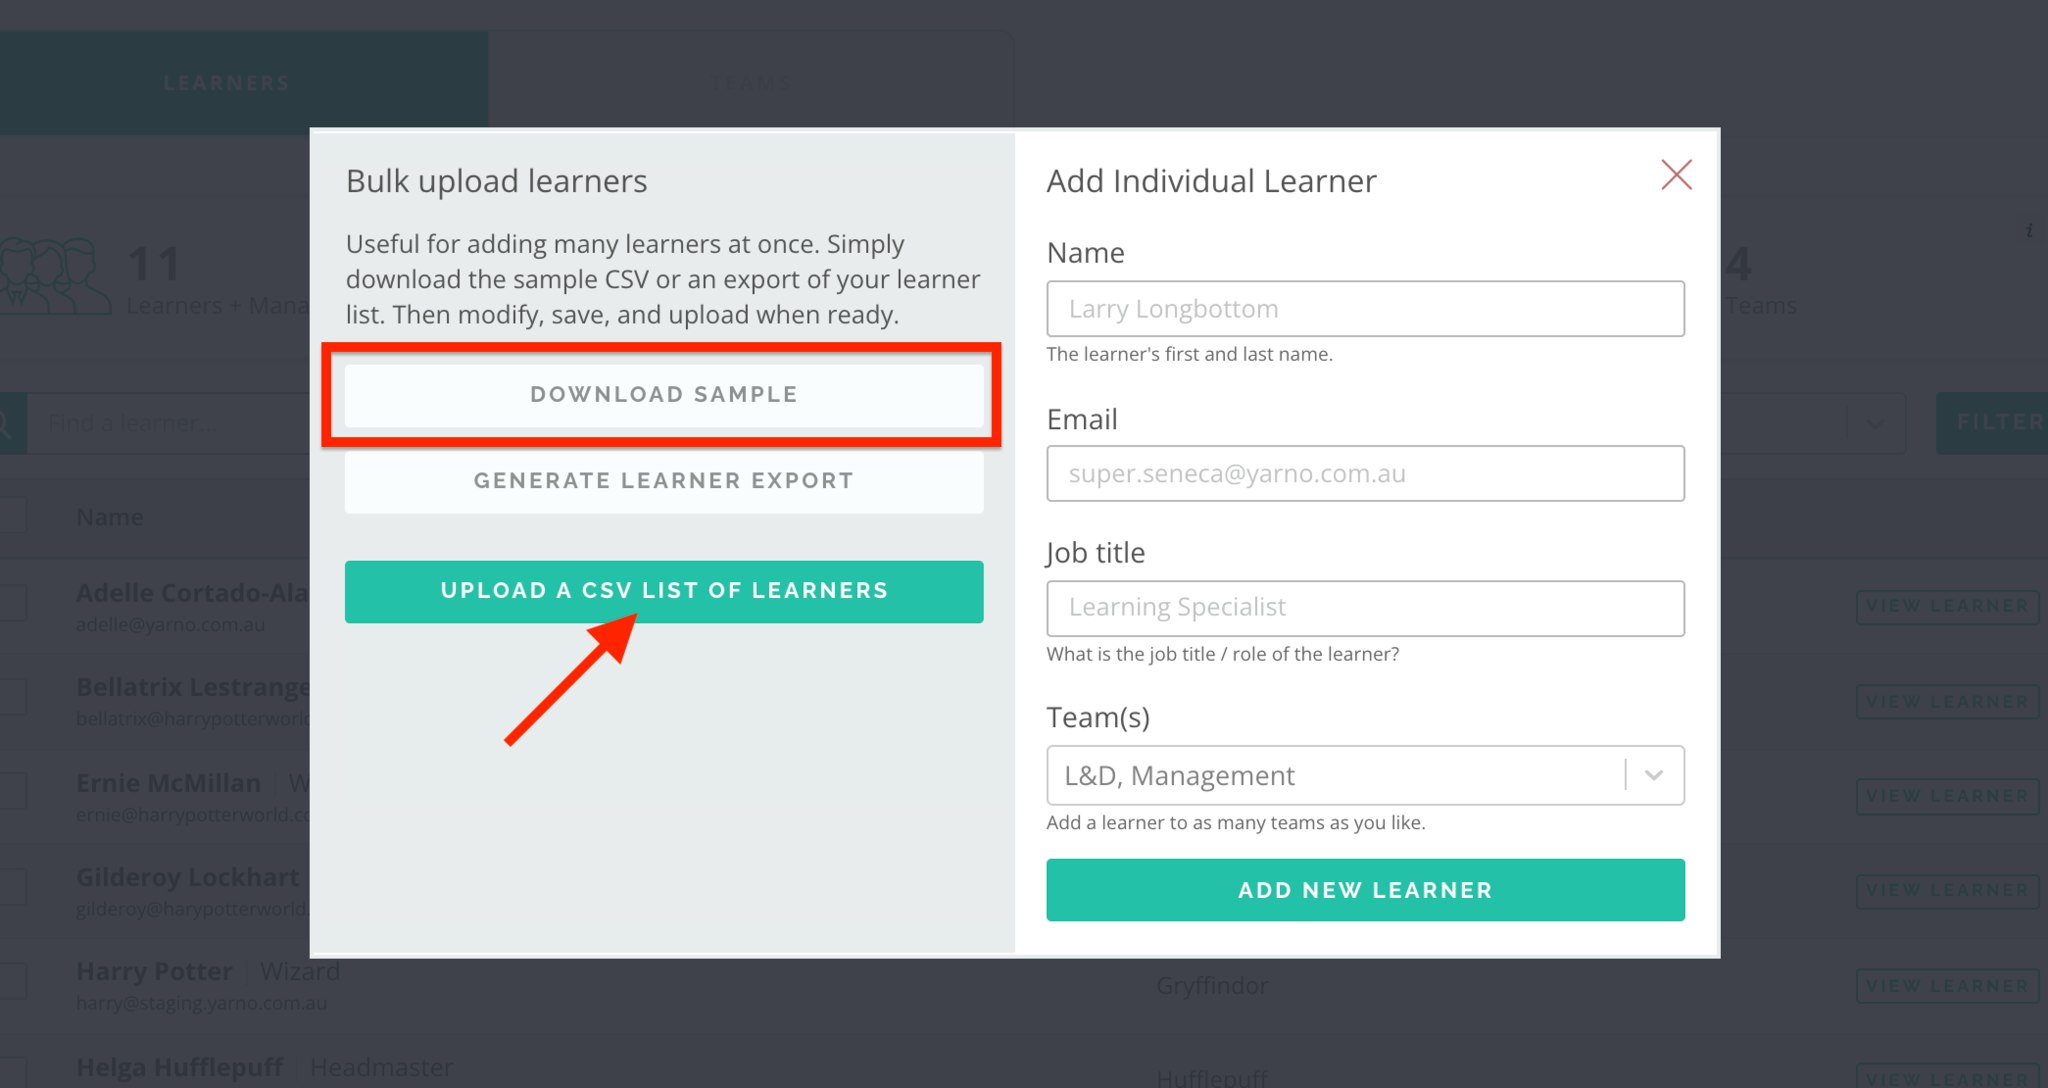 Using the bulk upload learner feature